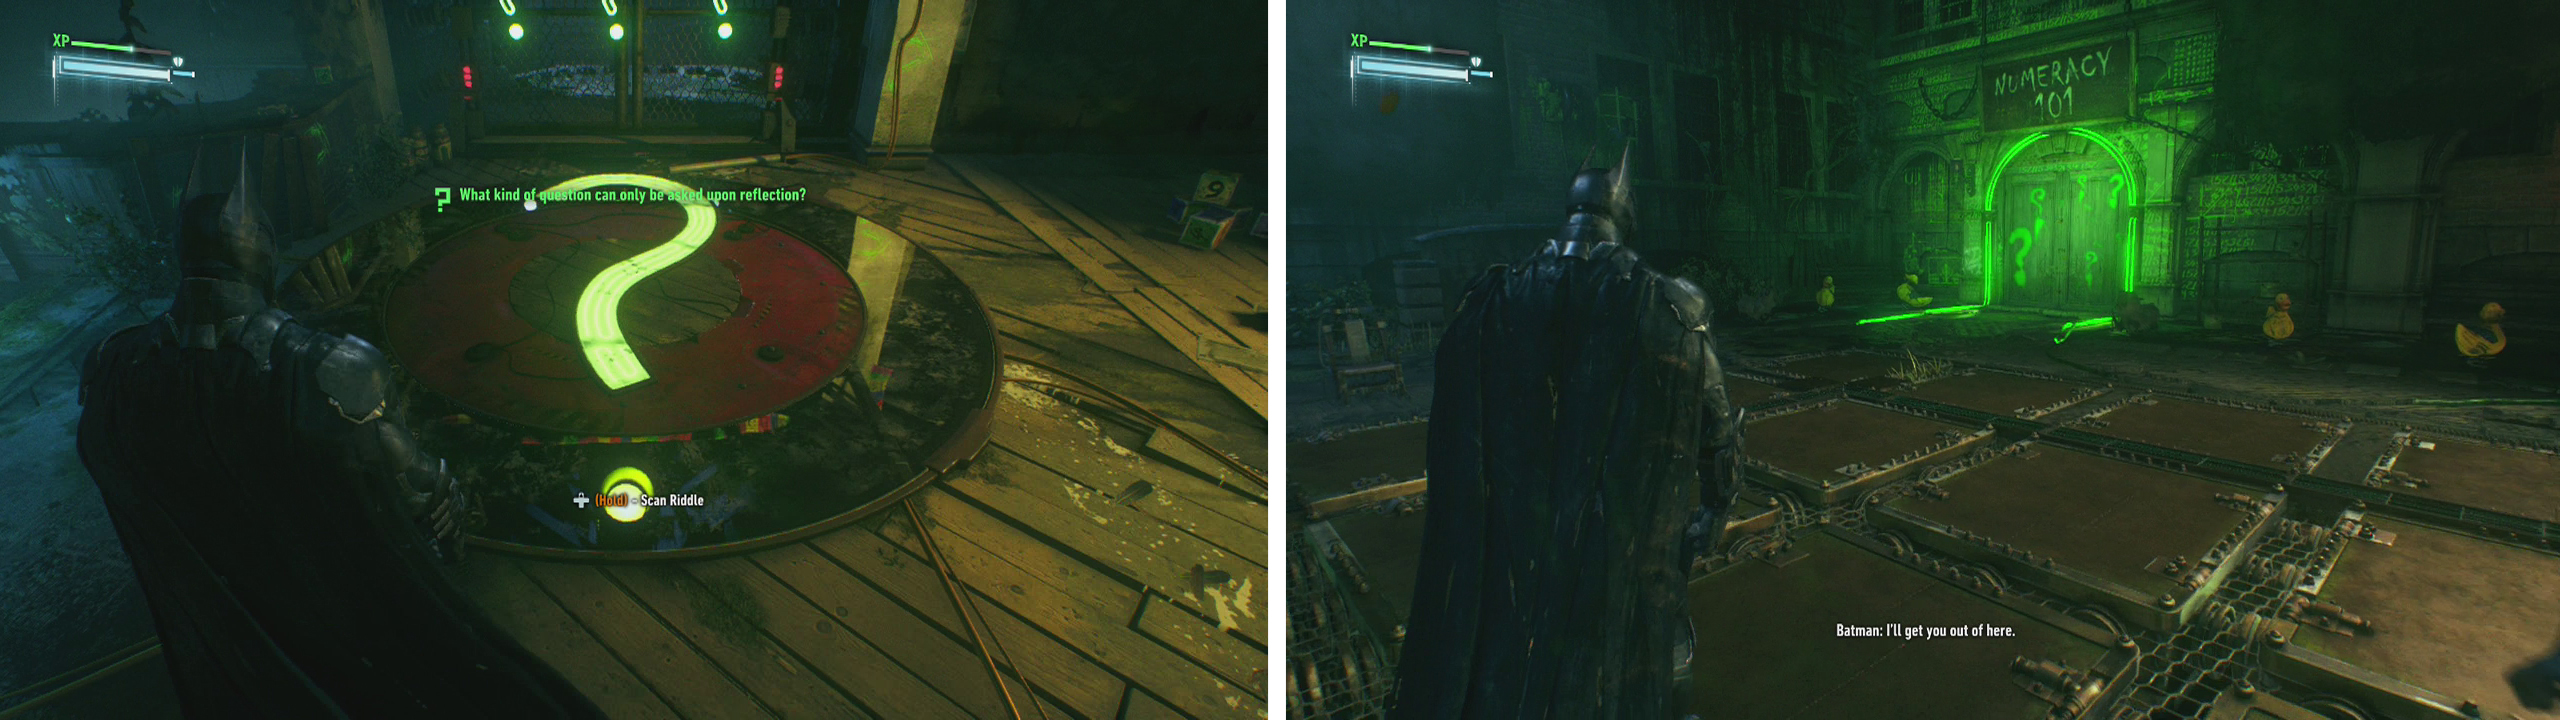 Use the question marks to align the floor (left). Continue through the lit up door to start the next challenge (right).